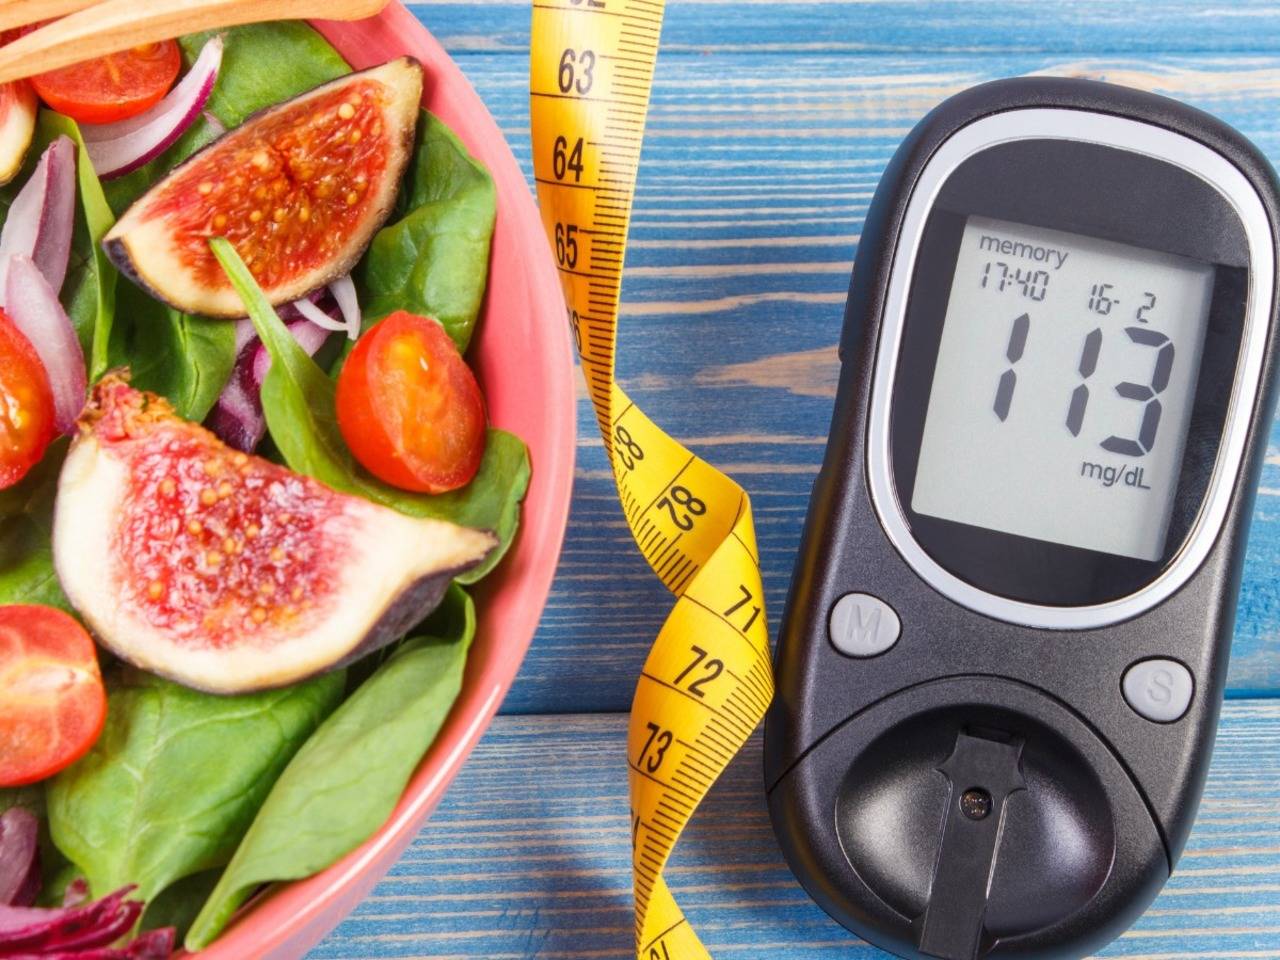 Indian diet plan for Type-2 diabetes: Sample diet to control blood sugar level - Times of India